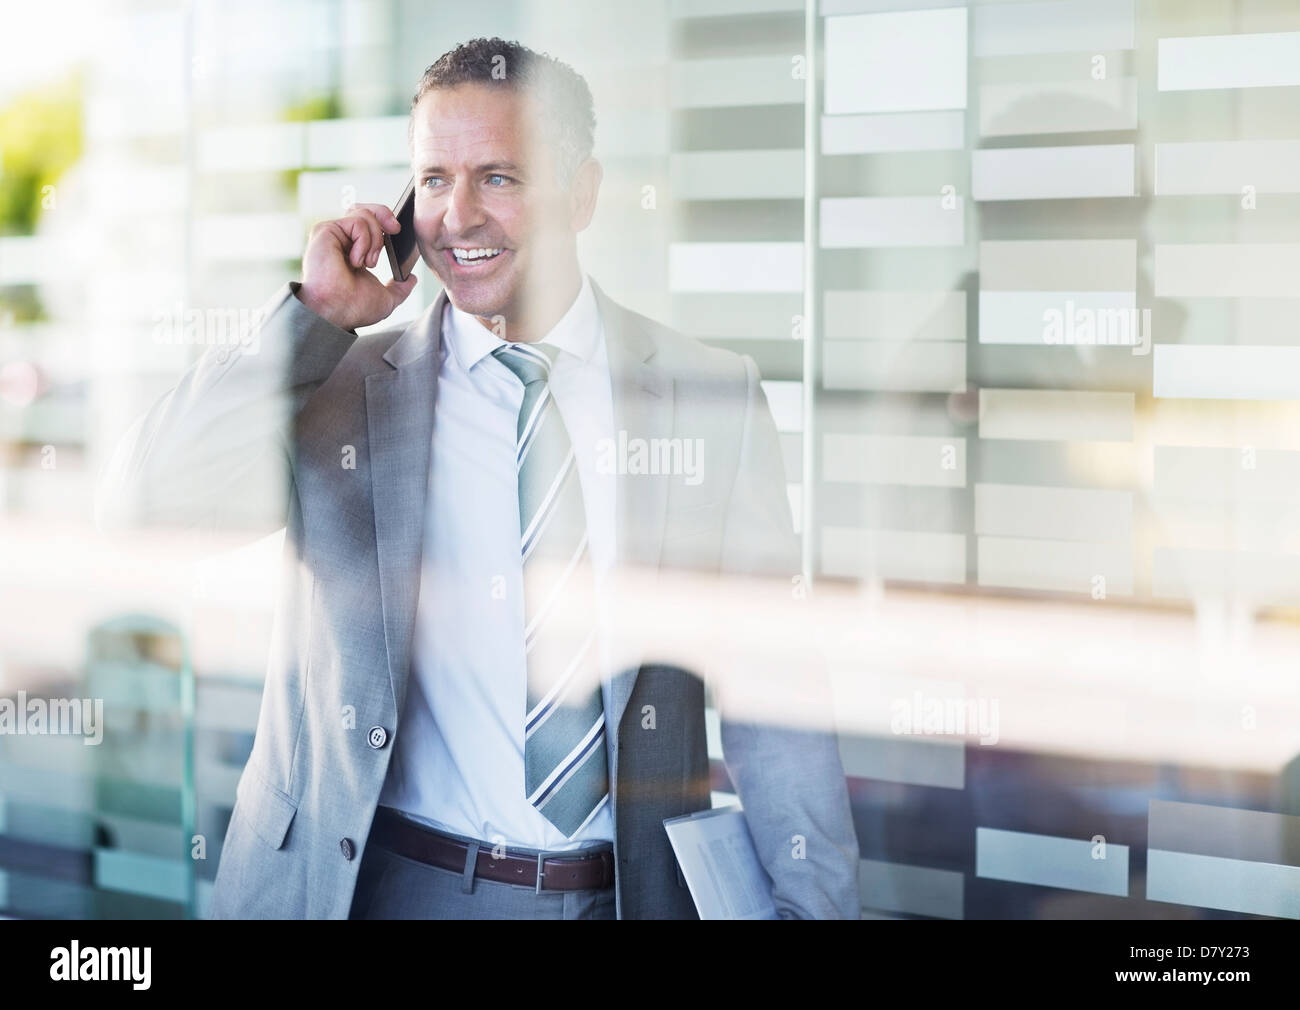 Businessman talking on cell phone Banque D'Images